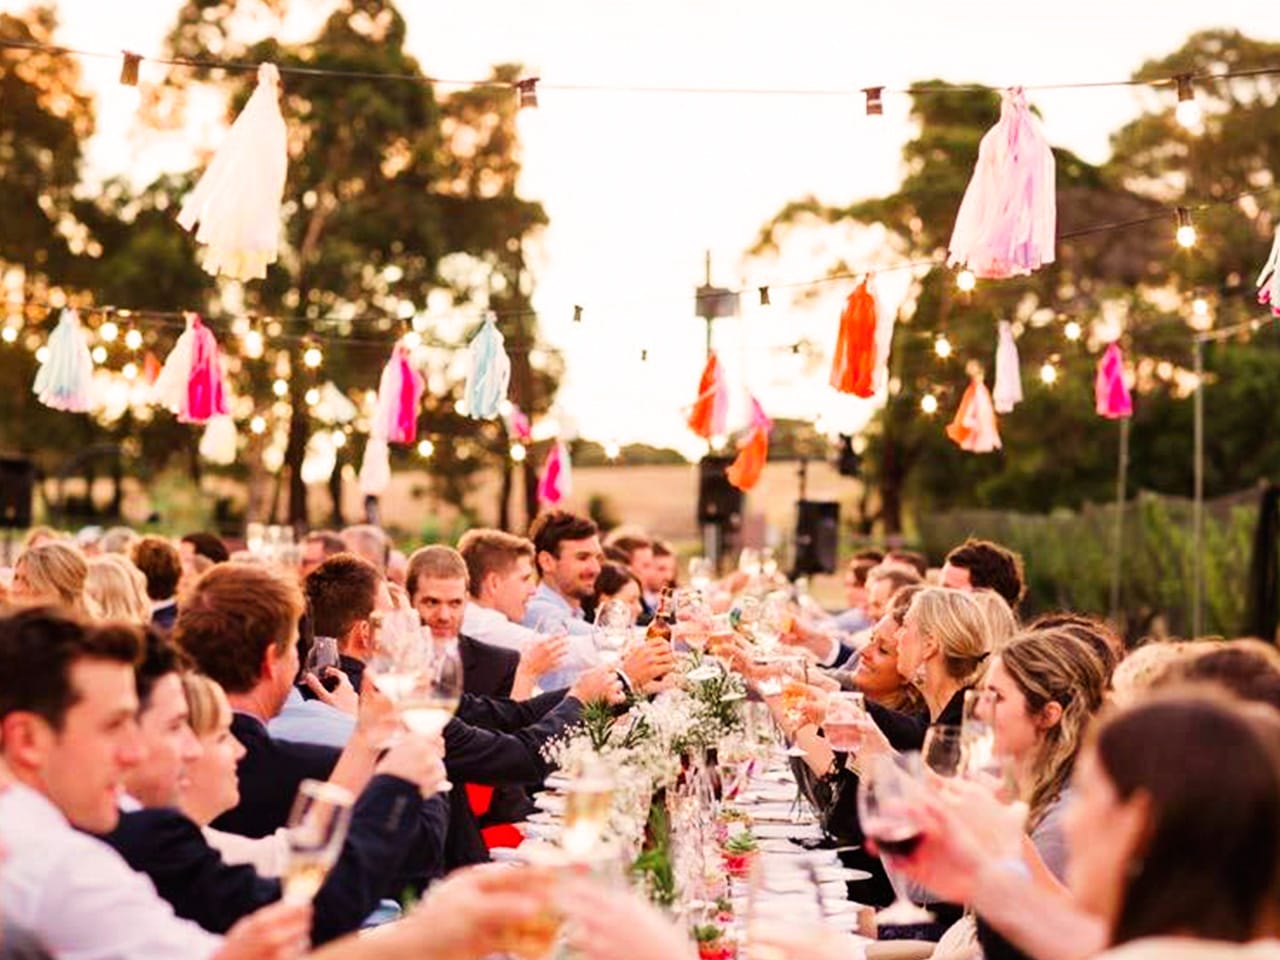 Guests Wine Toasting In A Long Table Under The Sky